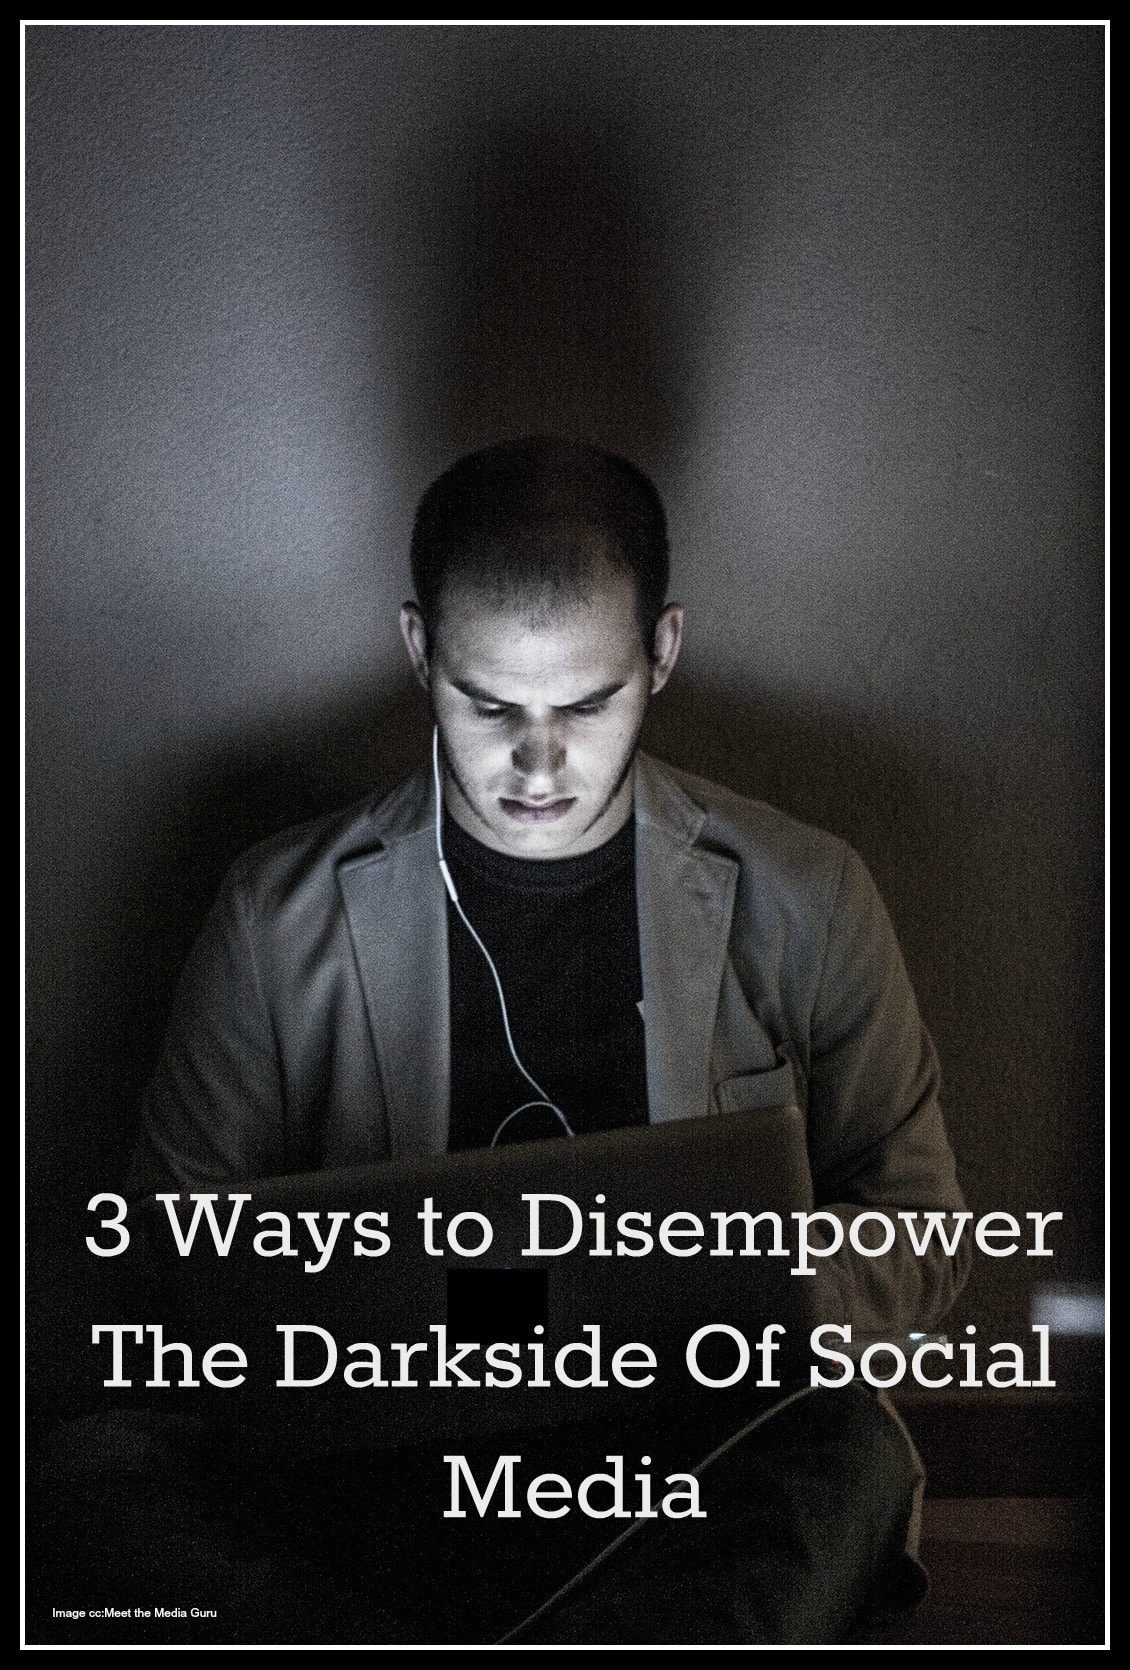 3 Ways to Disempower The Darkside Of Social Media